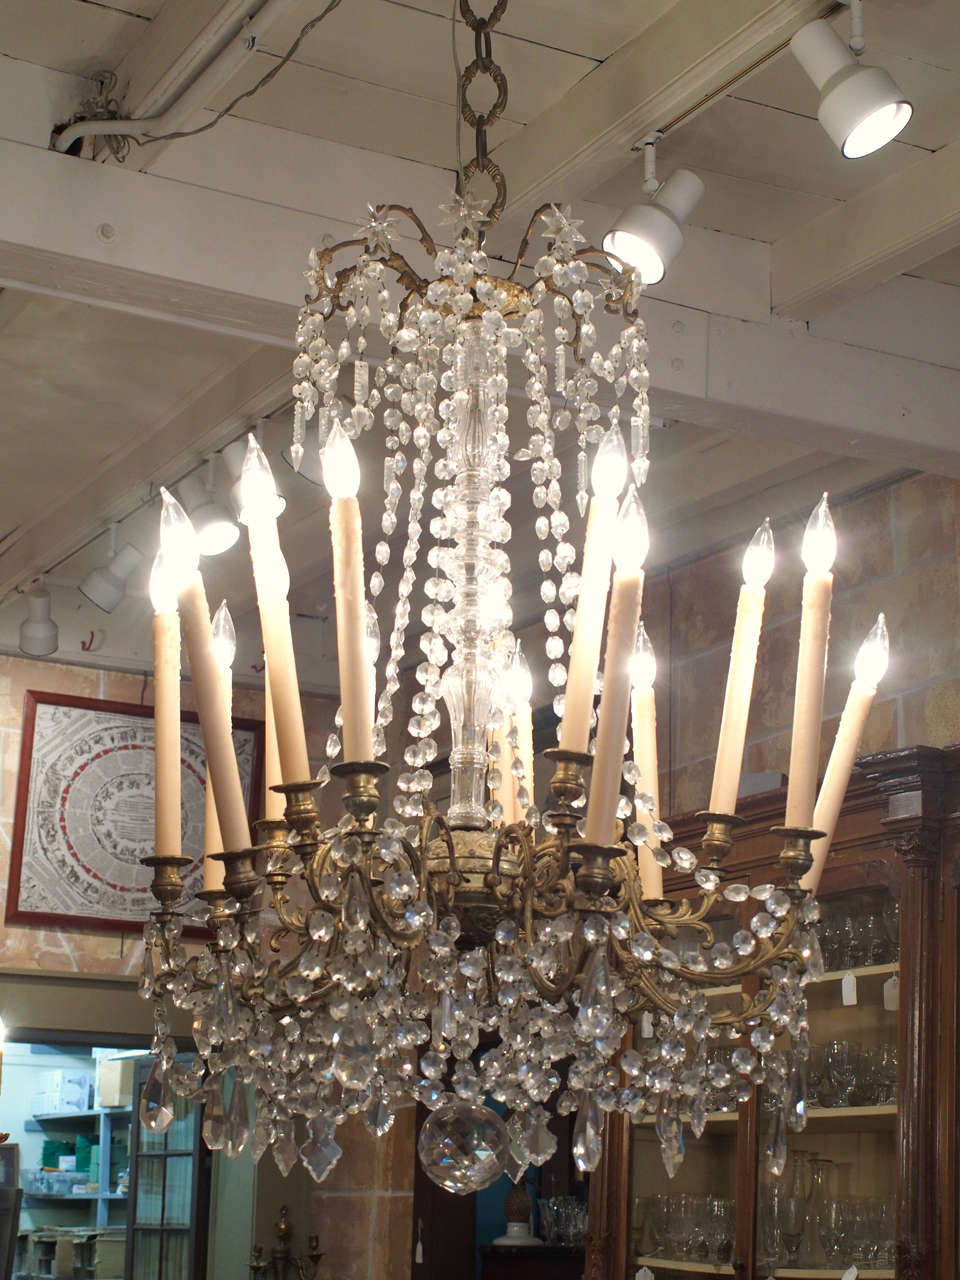 Grand early 19th century French Charles X period eighteen-arm bronze and crystal chandelier, circa 1830-1840.